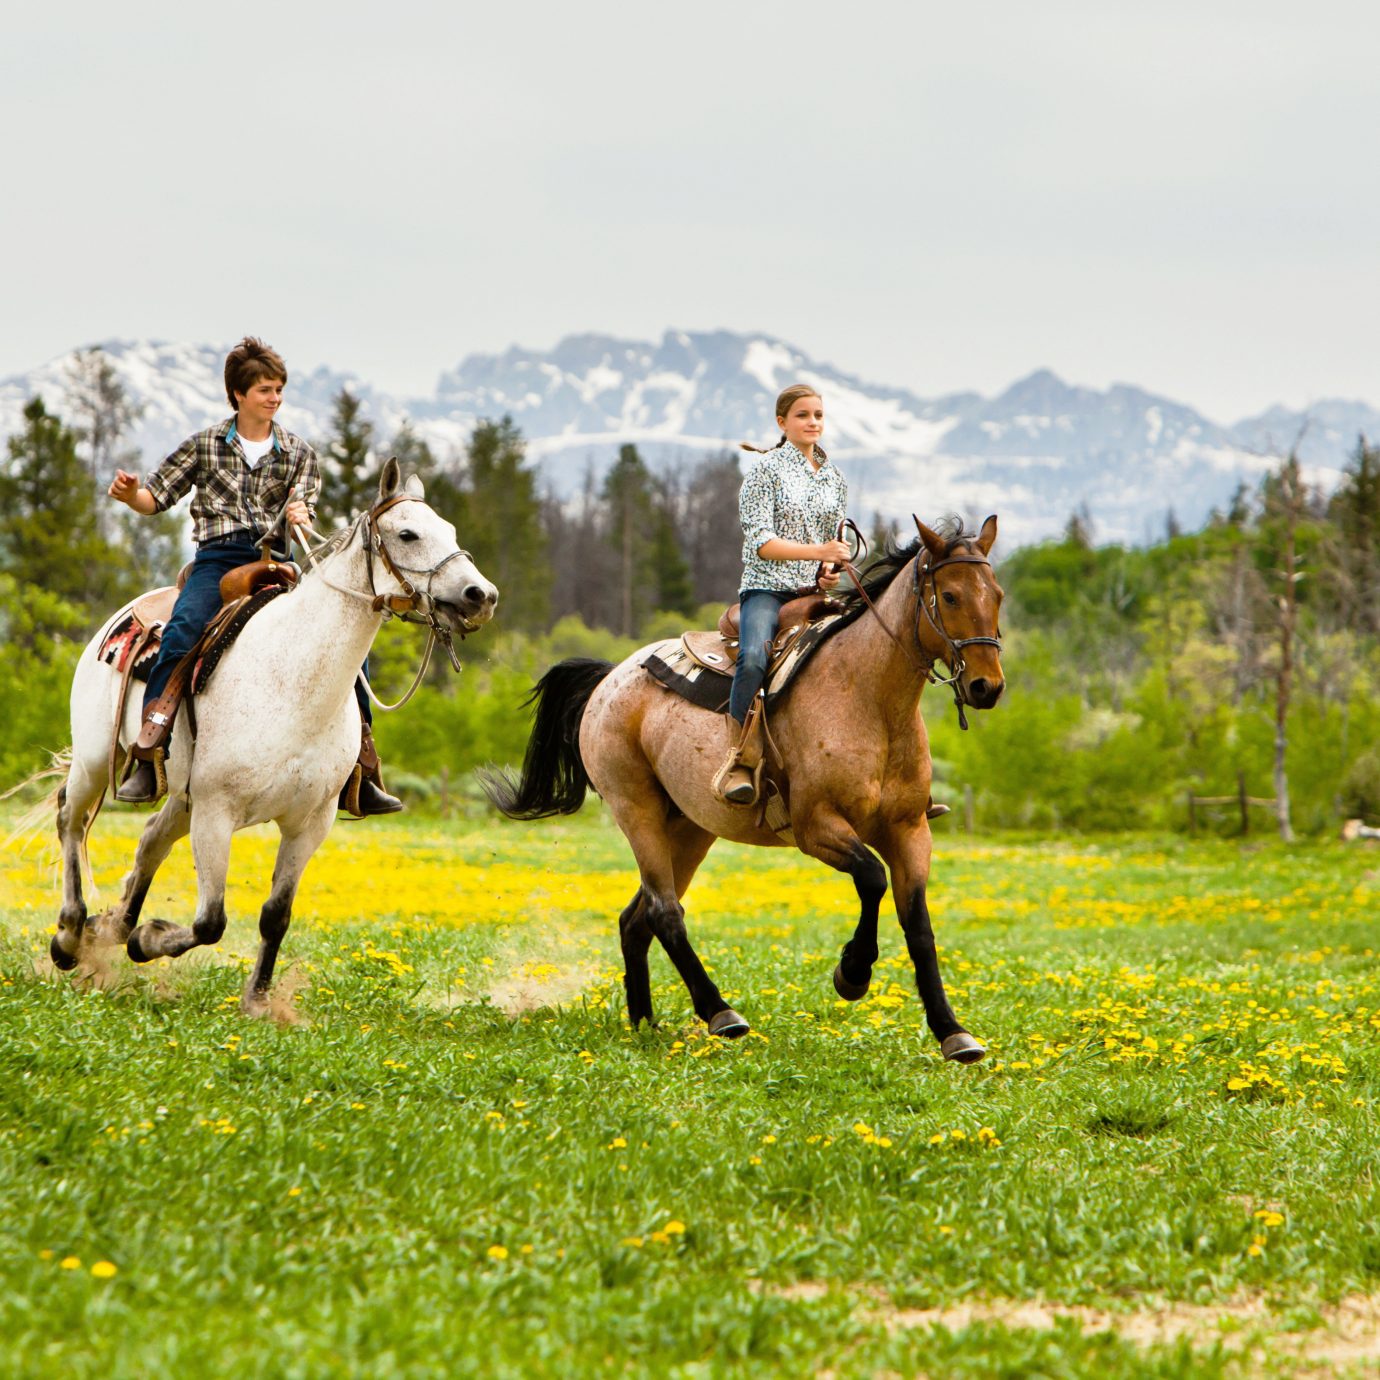 Country Mountains Outdoor Activities Ranch Rustic grass sky field endurance riding horse pasture trail riding equestrianism grassland mare eventing mustang horse equestrian sport animal sports horse like mammal english riding grazing meadow mammal sports stallion herd grassy